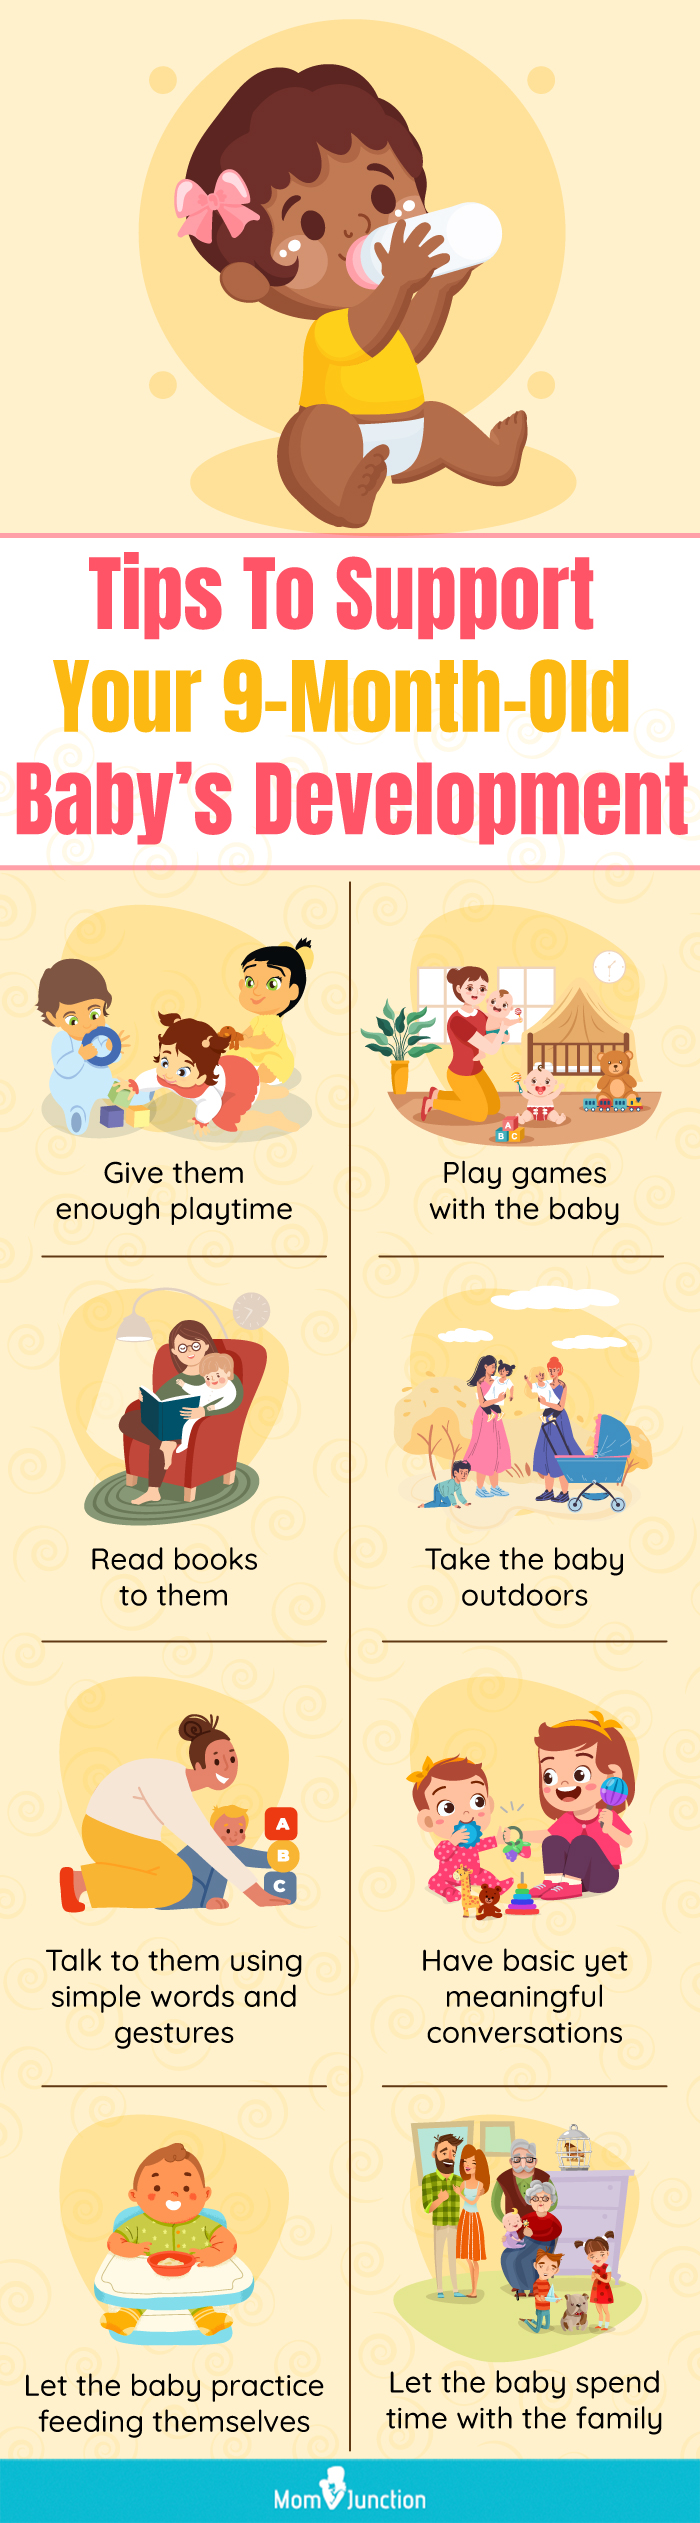 tips to support your 9 month old babys development (infographic)